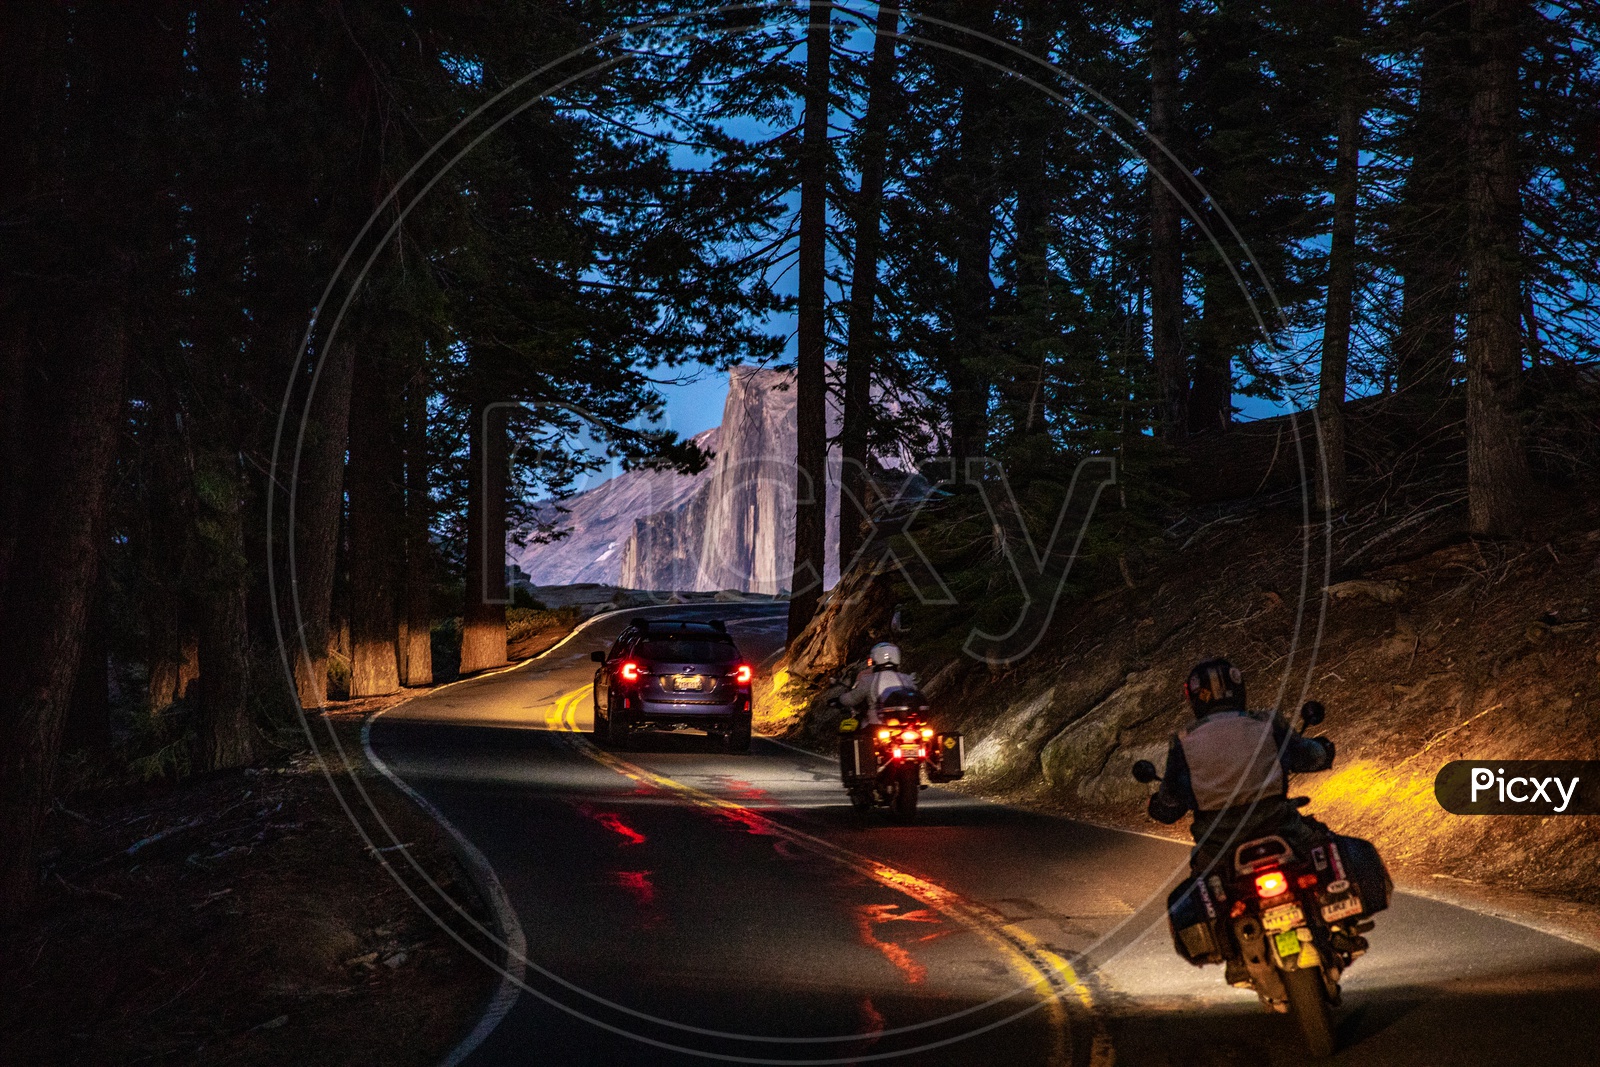 A Road With Curves In Yosemite Valley In Night Time With California Black Oak Trees On Both Sides Of Road